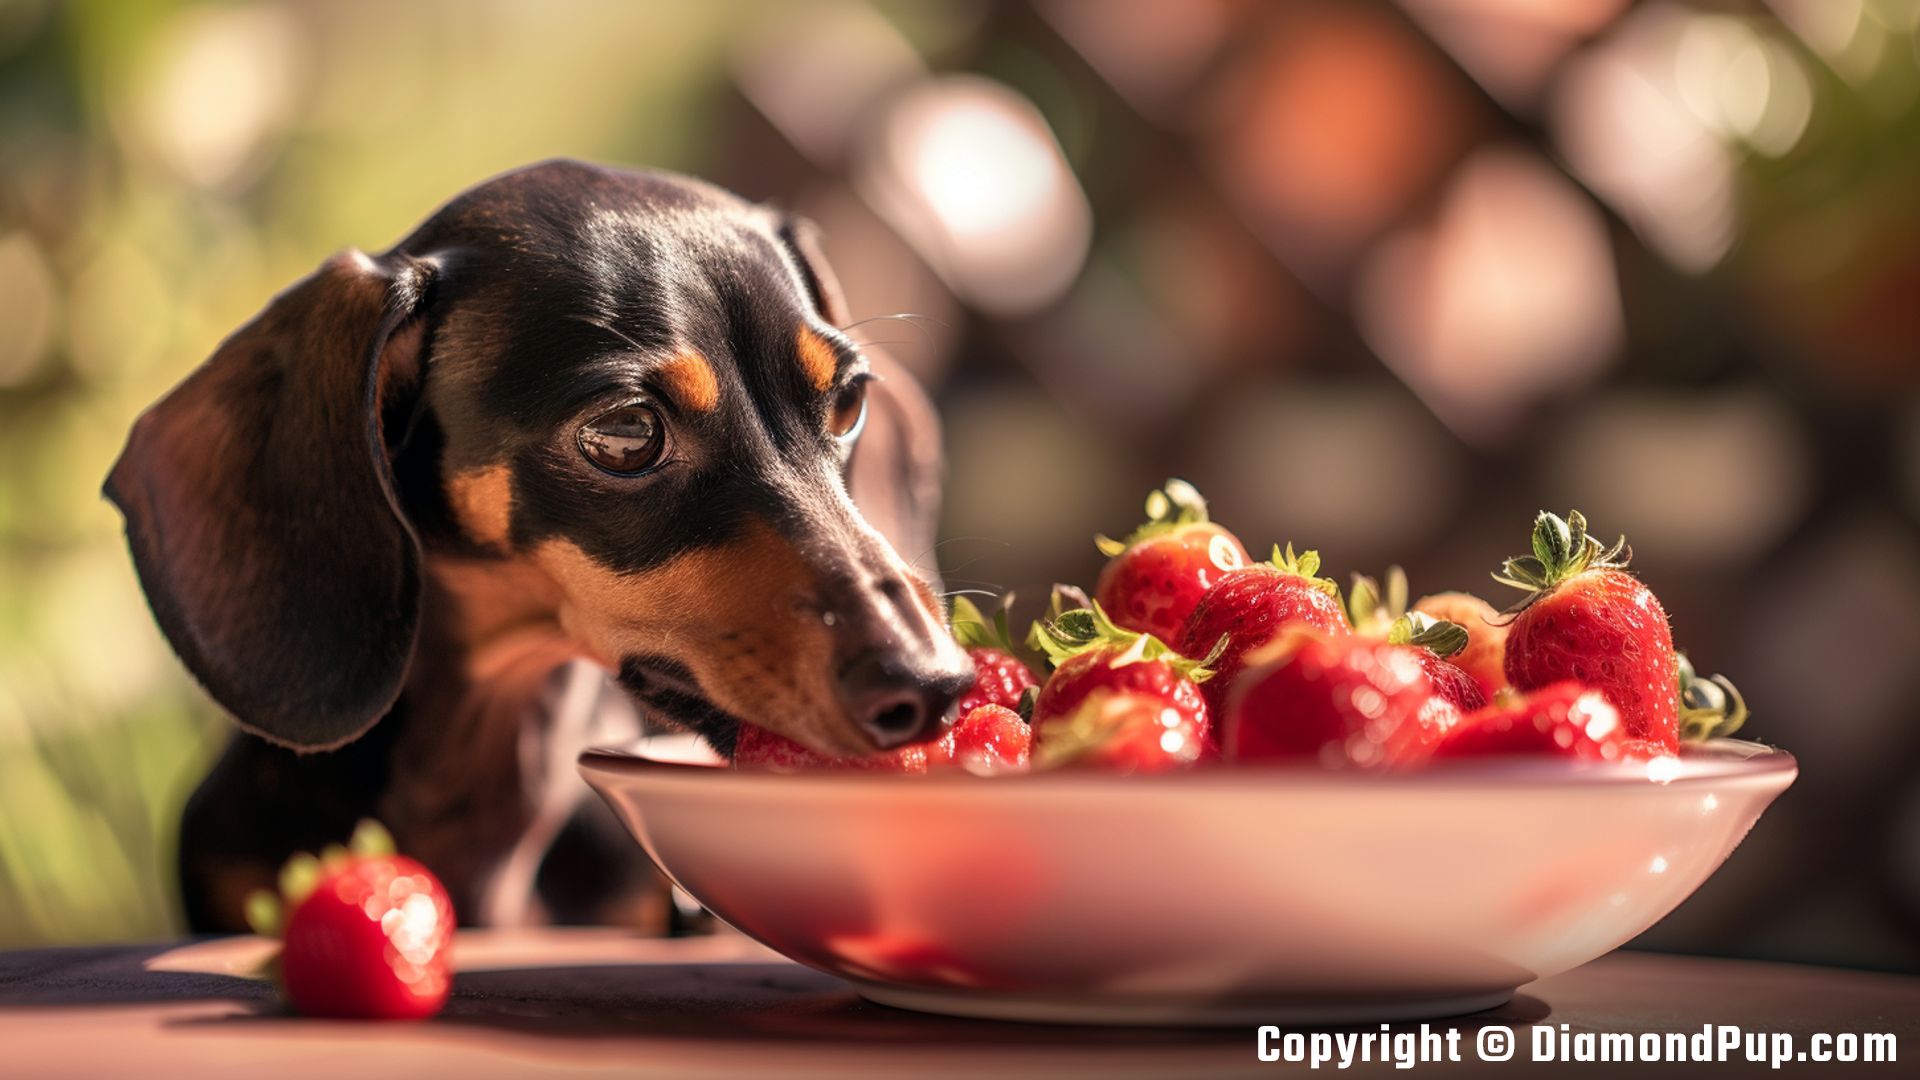 Photograph of a Happy Dachshund Snacking on Strawberries